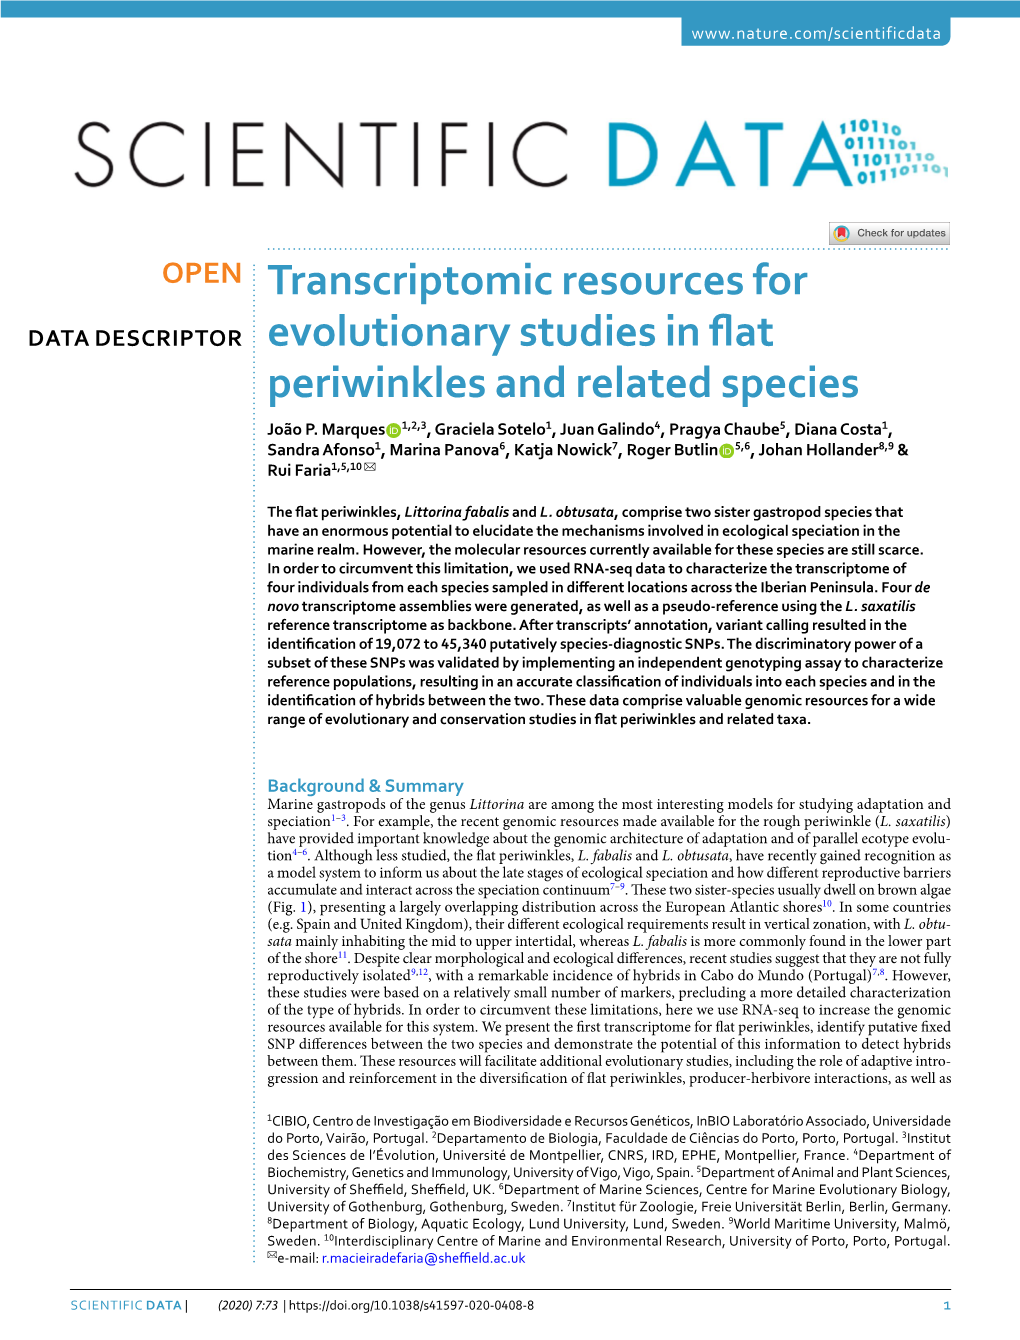 Transcriptomic Resources for Evolutionary Studies in Flat